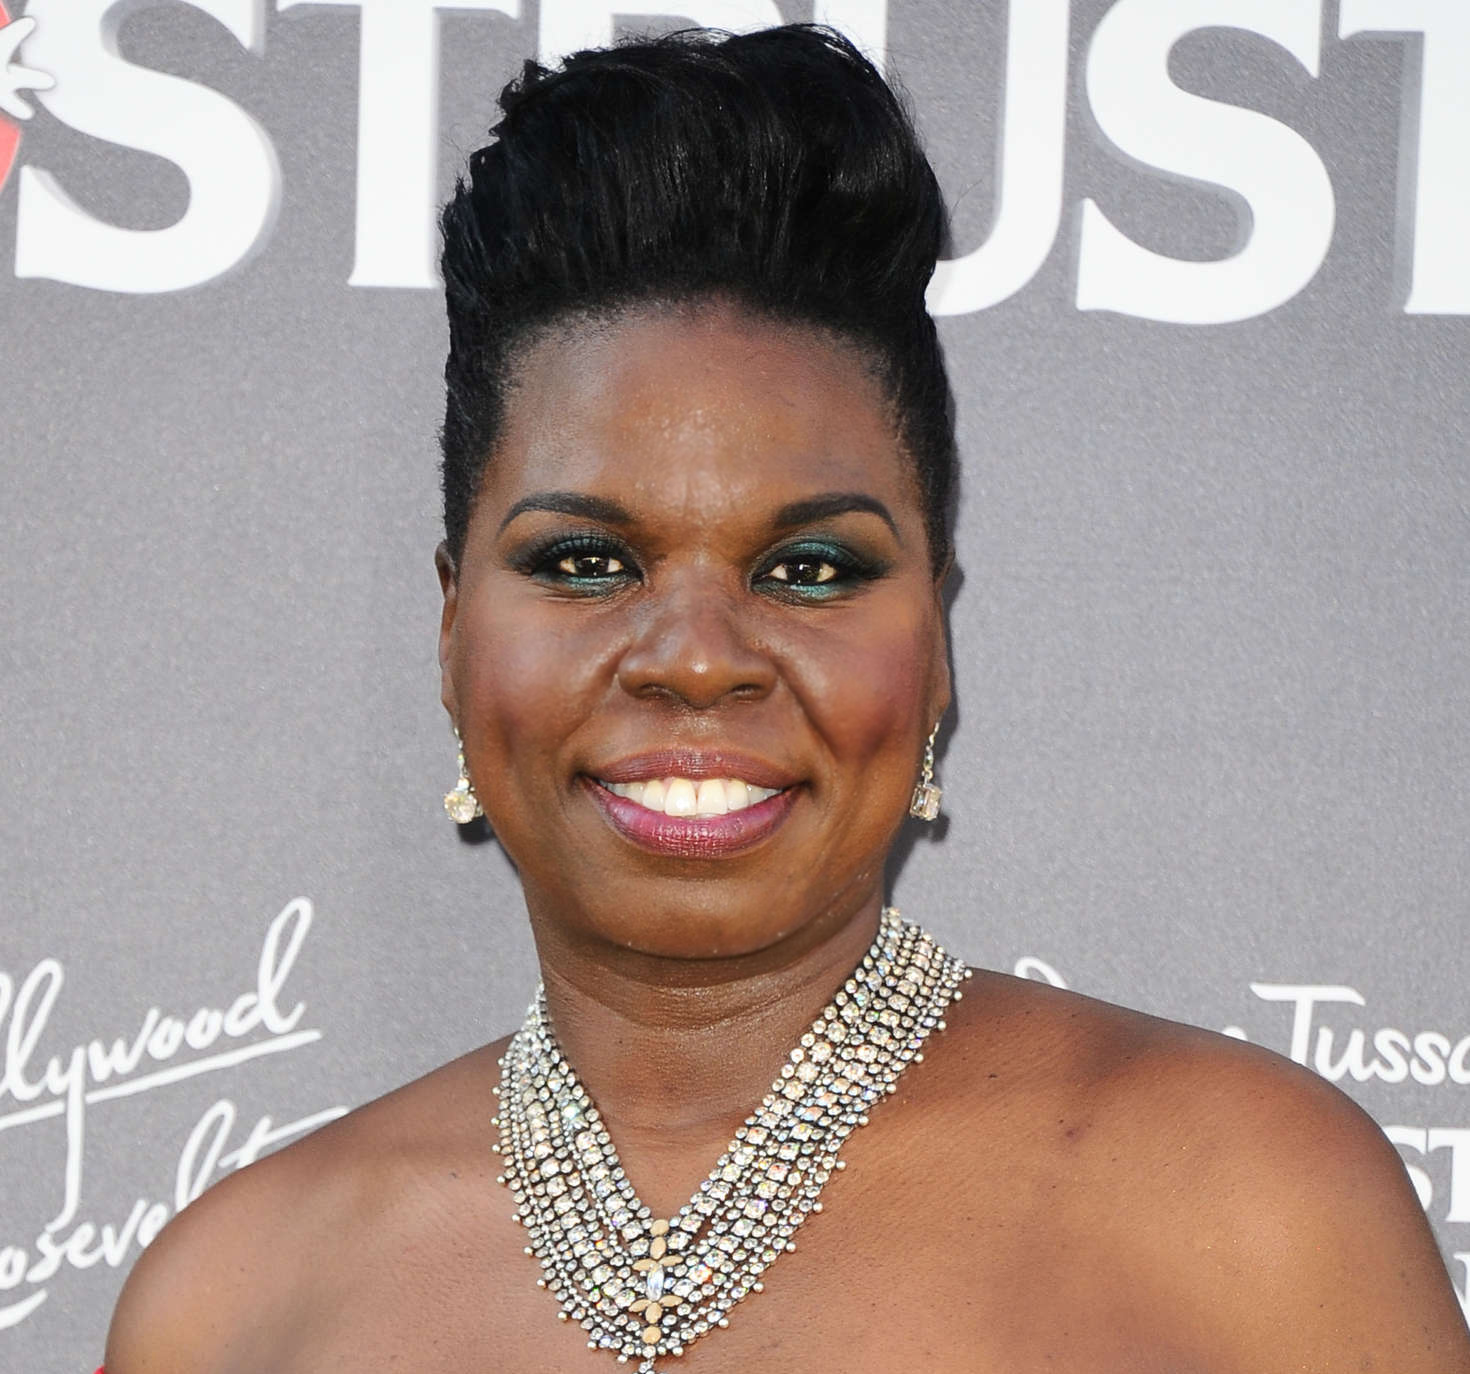 Yesterday (and for many days before), Leslie Jones was accosted on Twitter ...